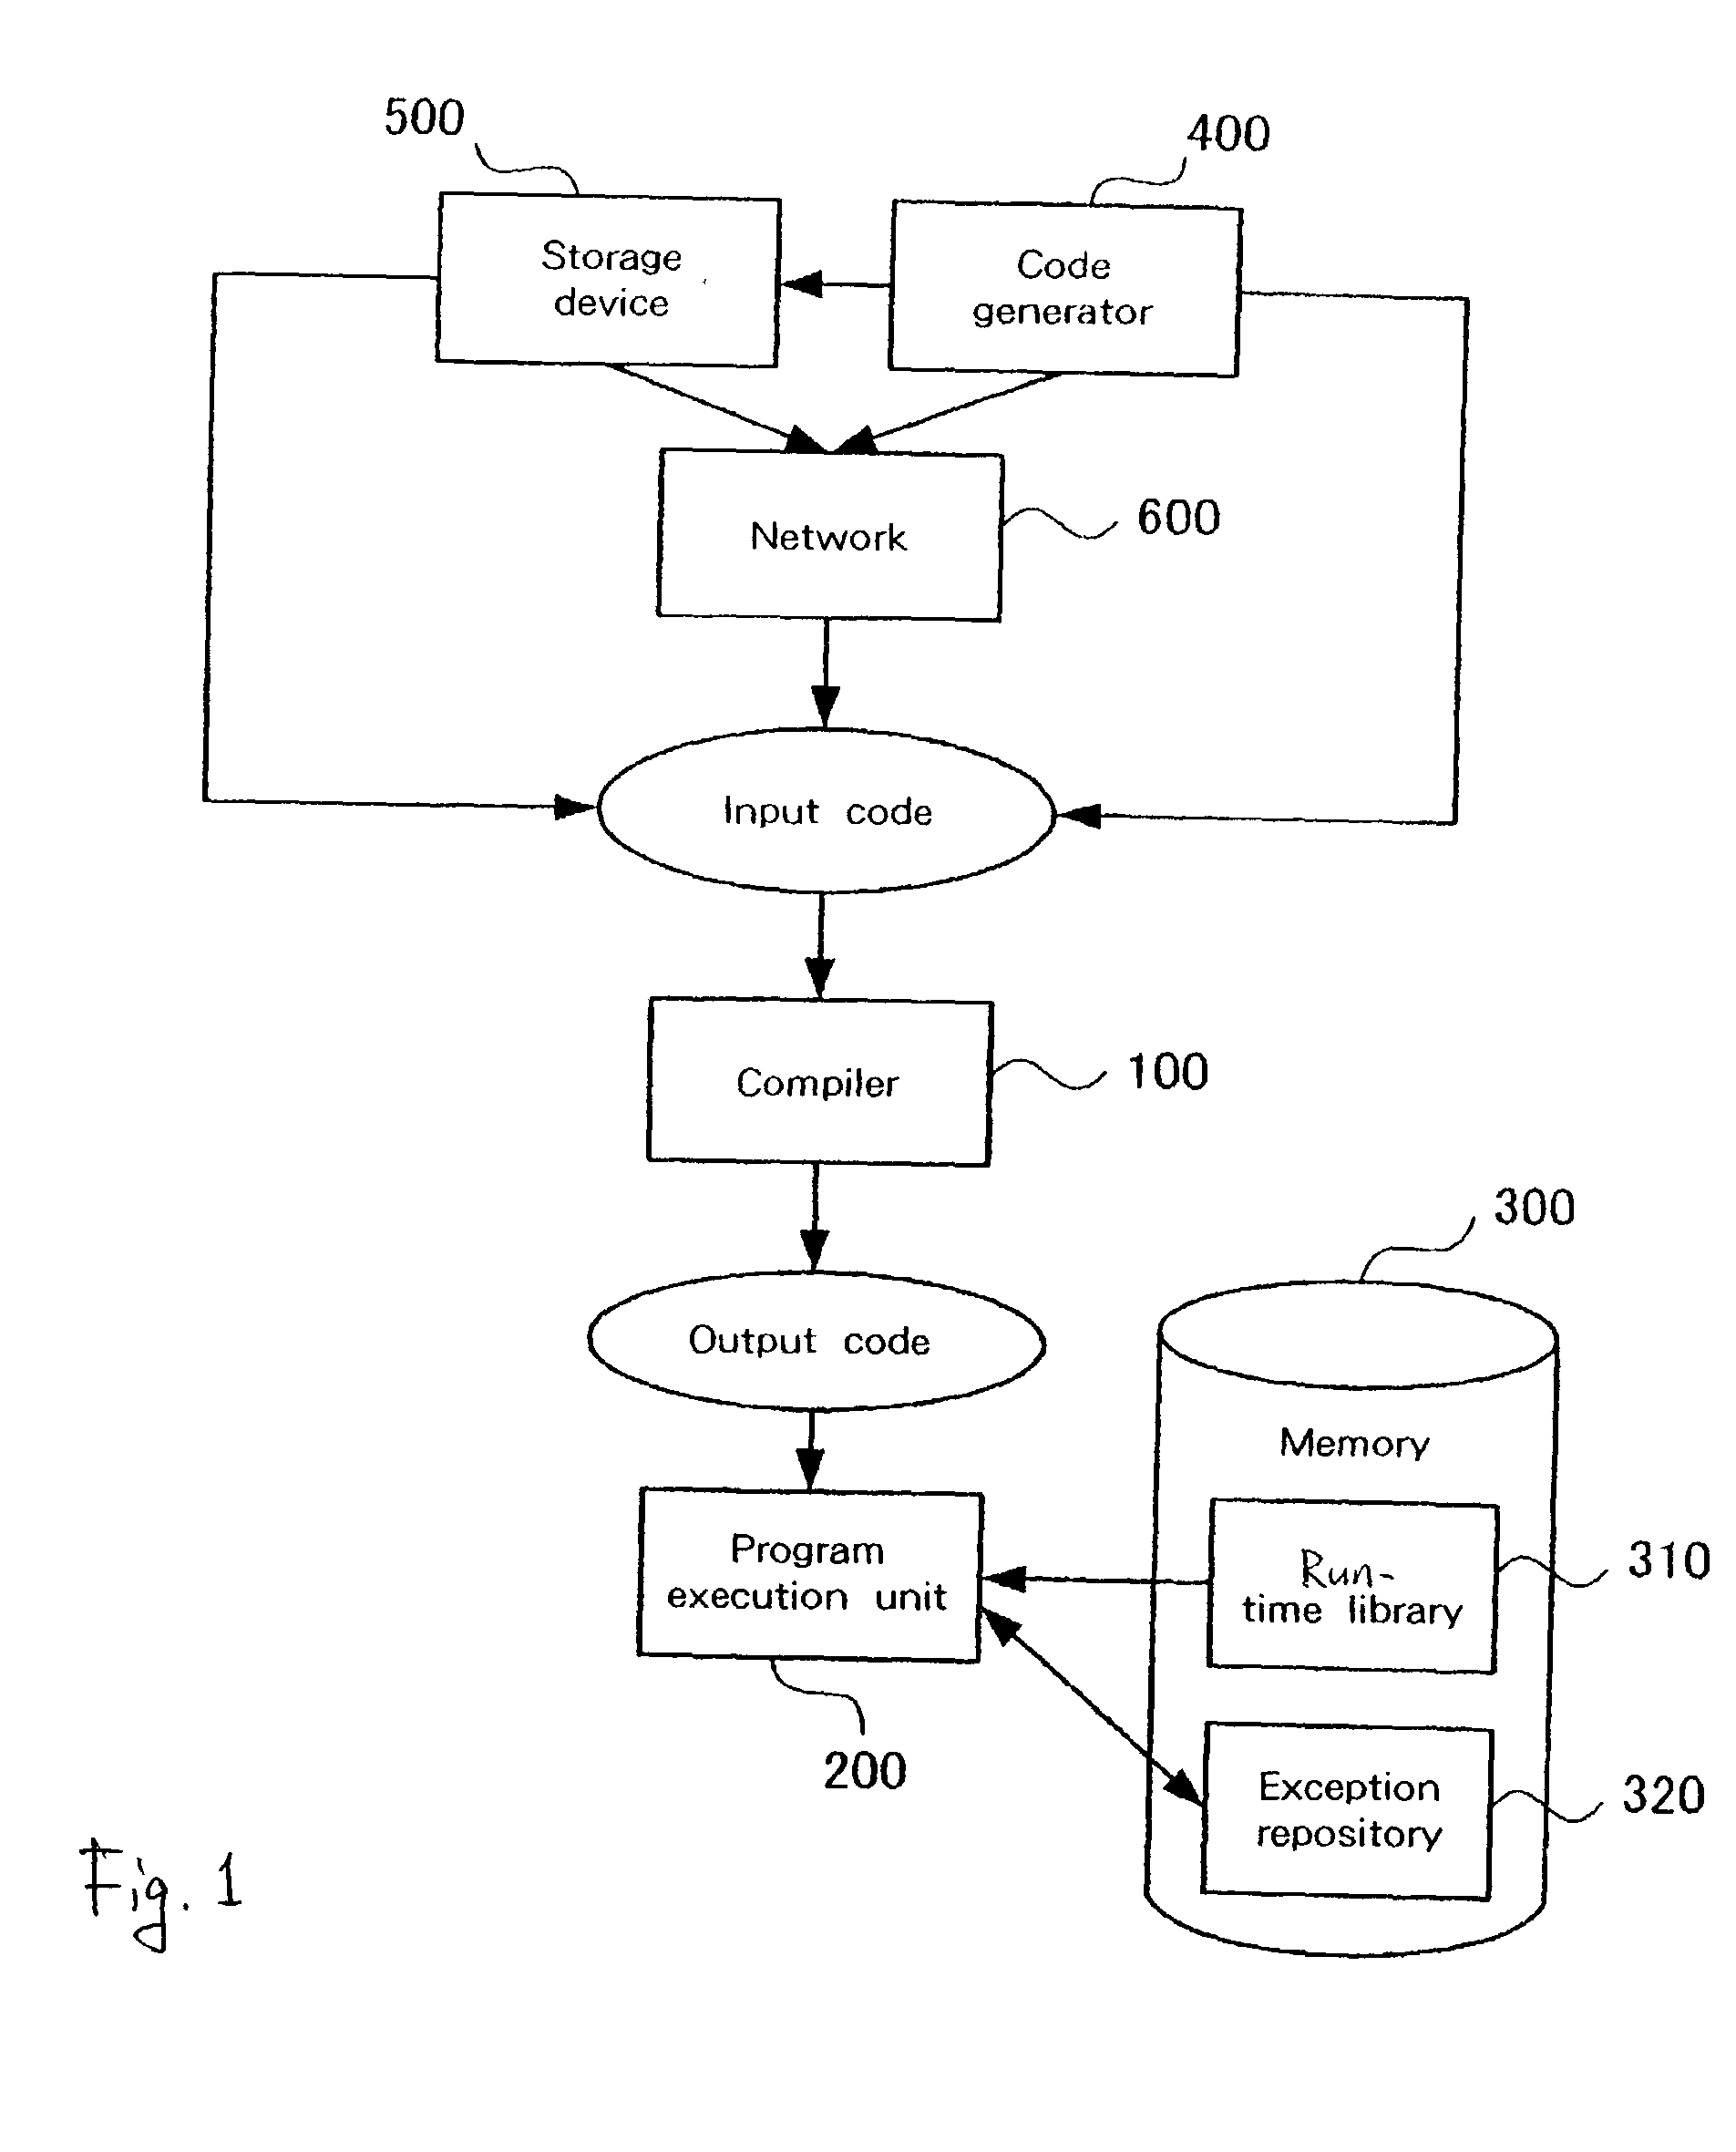 System and method for handling an exception in a program